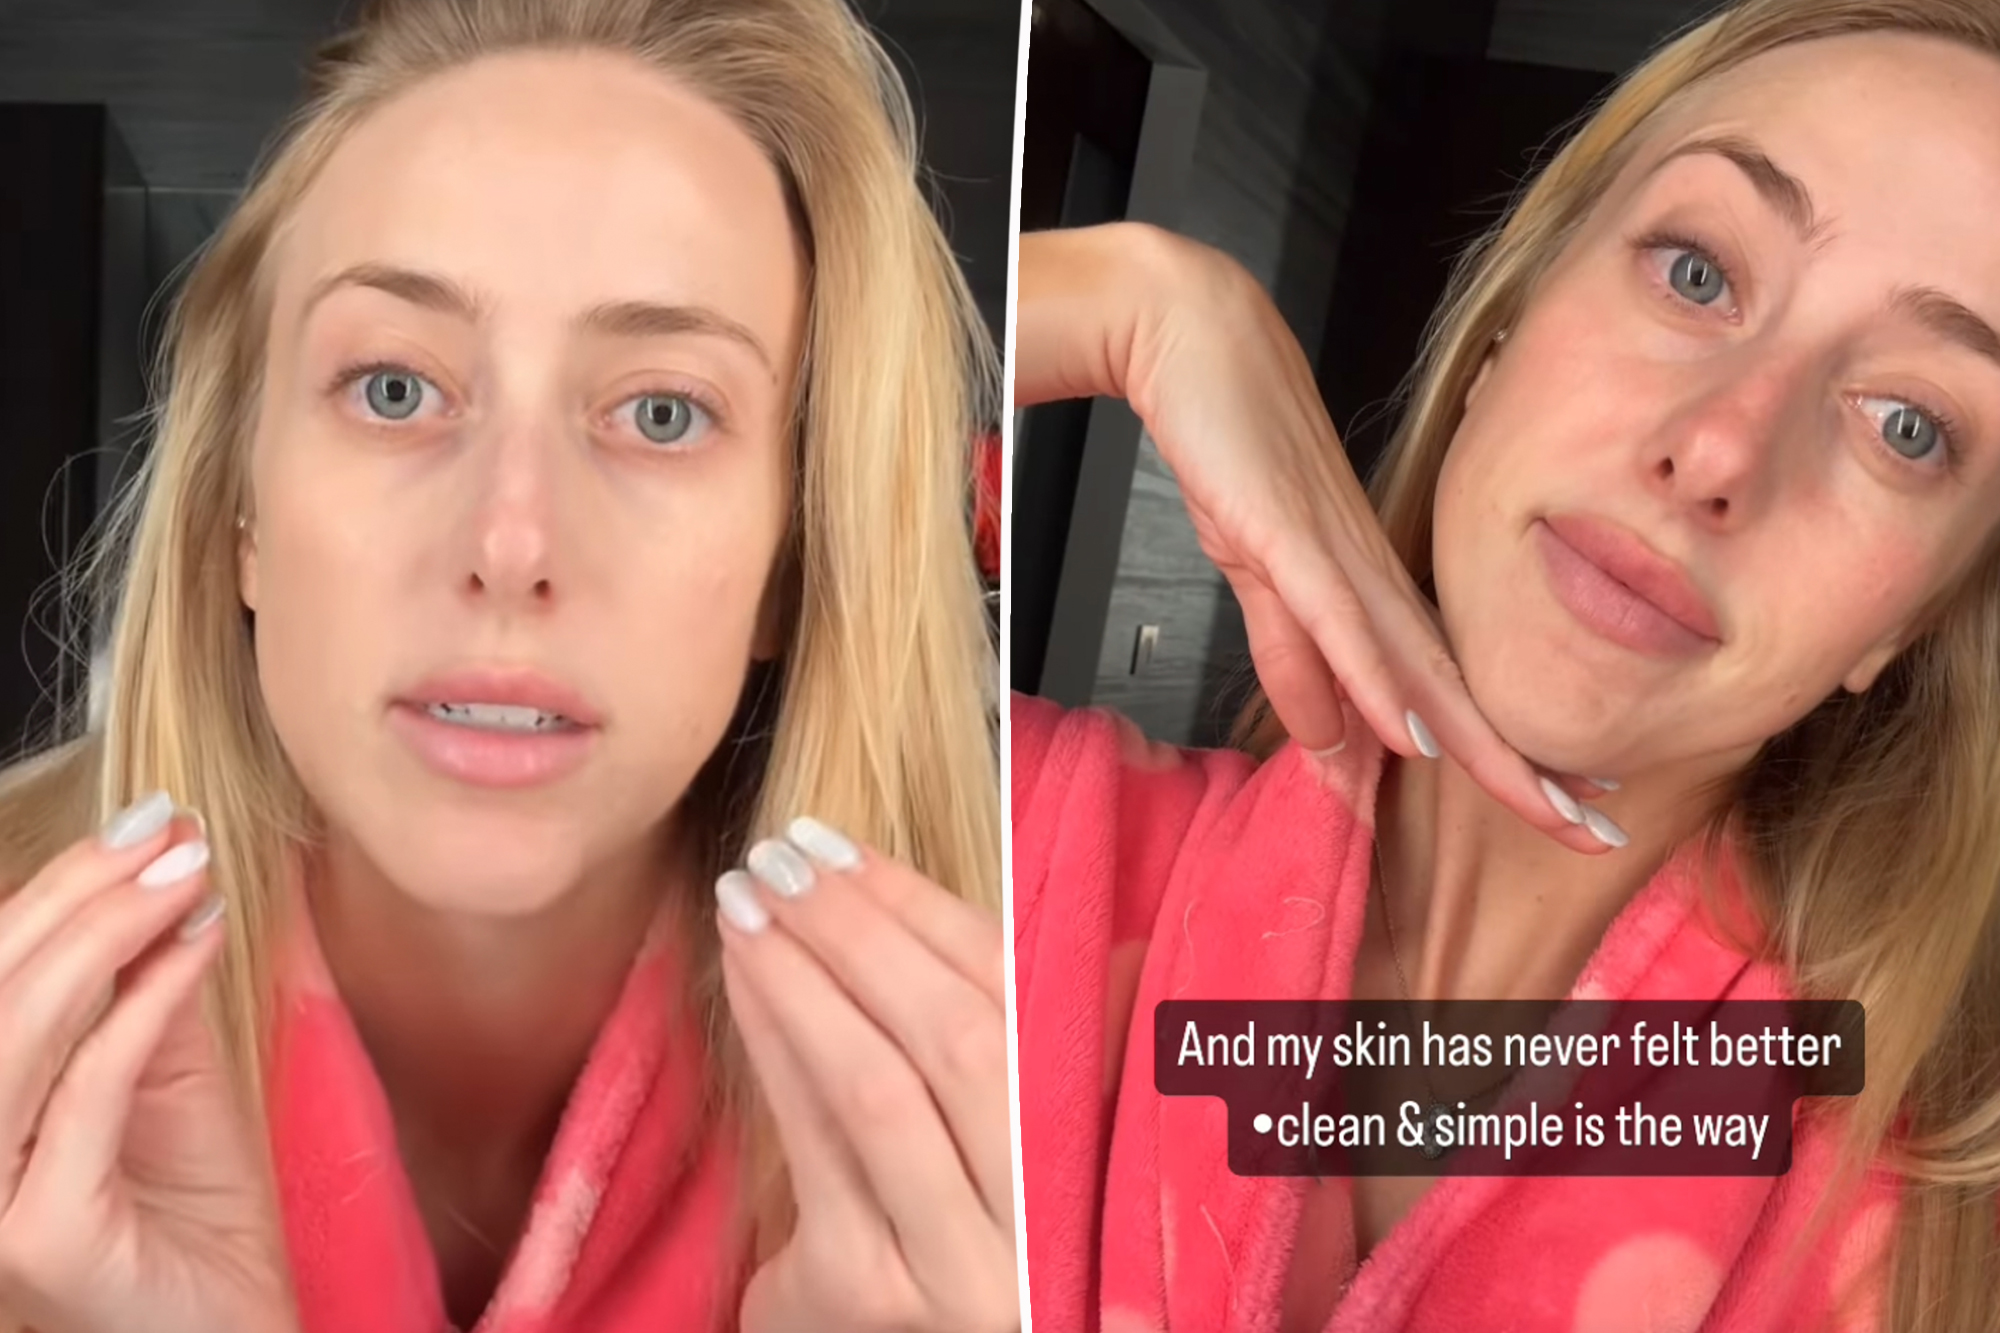 Brittany Mahomes shares her under-$125 skincare routine after revealing she suffers from perioral dermatitis